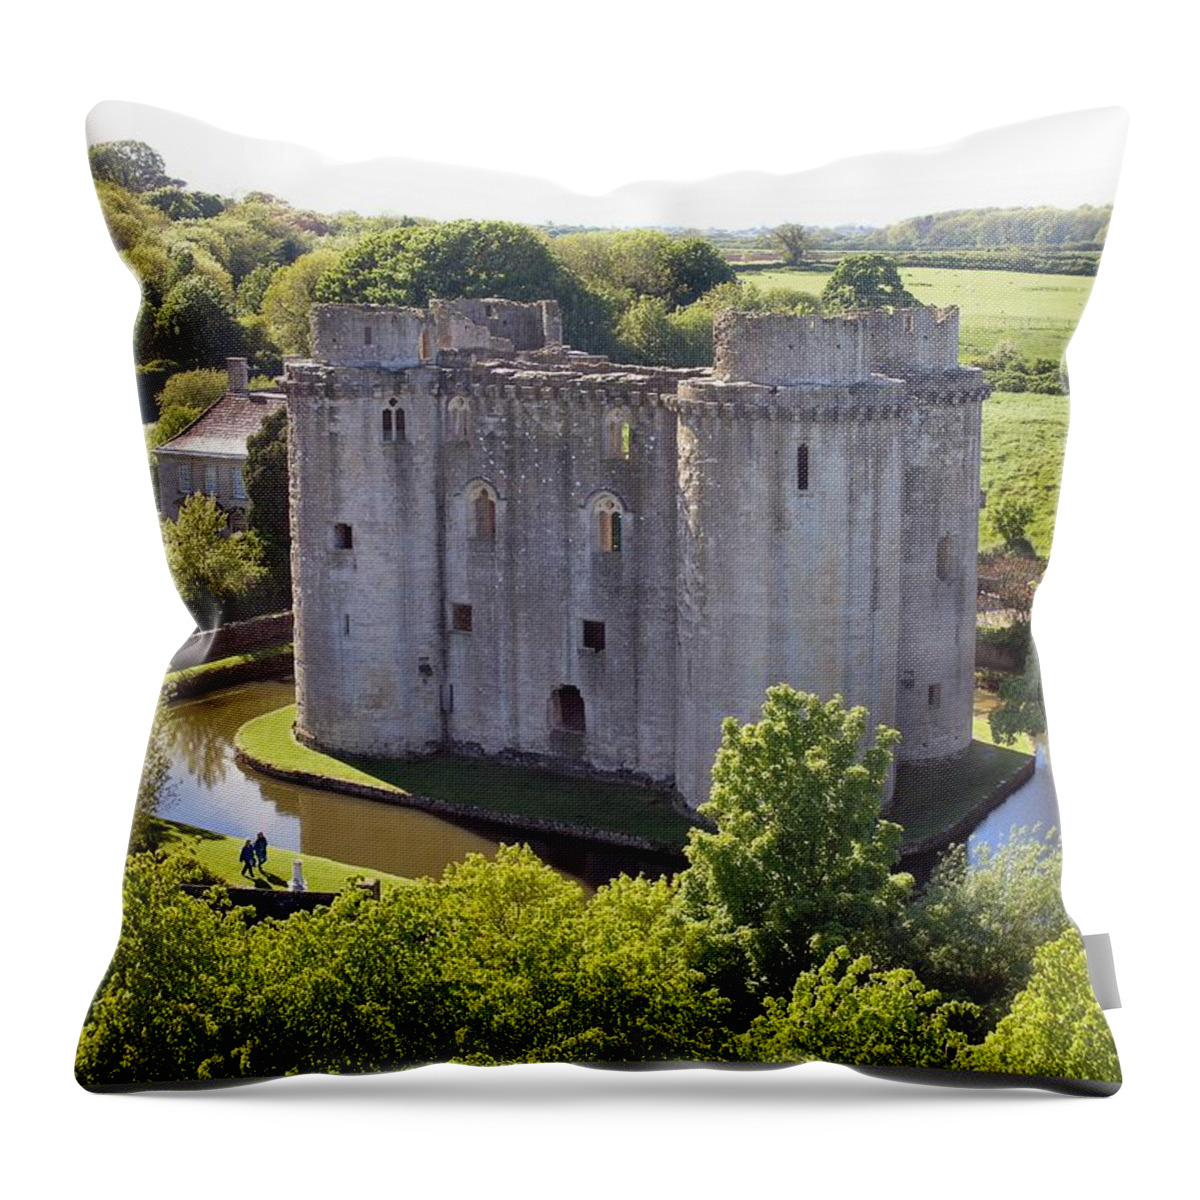 Castle Throw Pillow featuring the photograph Nunney Castle by Ron Harpham